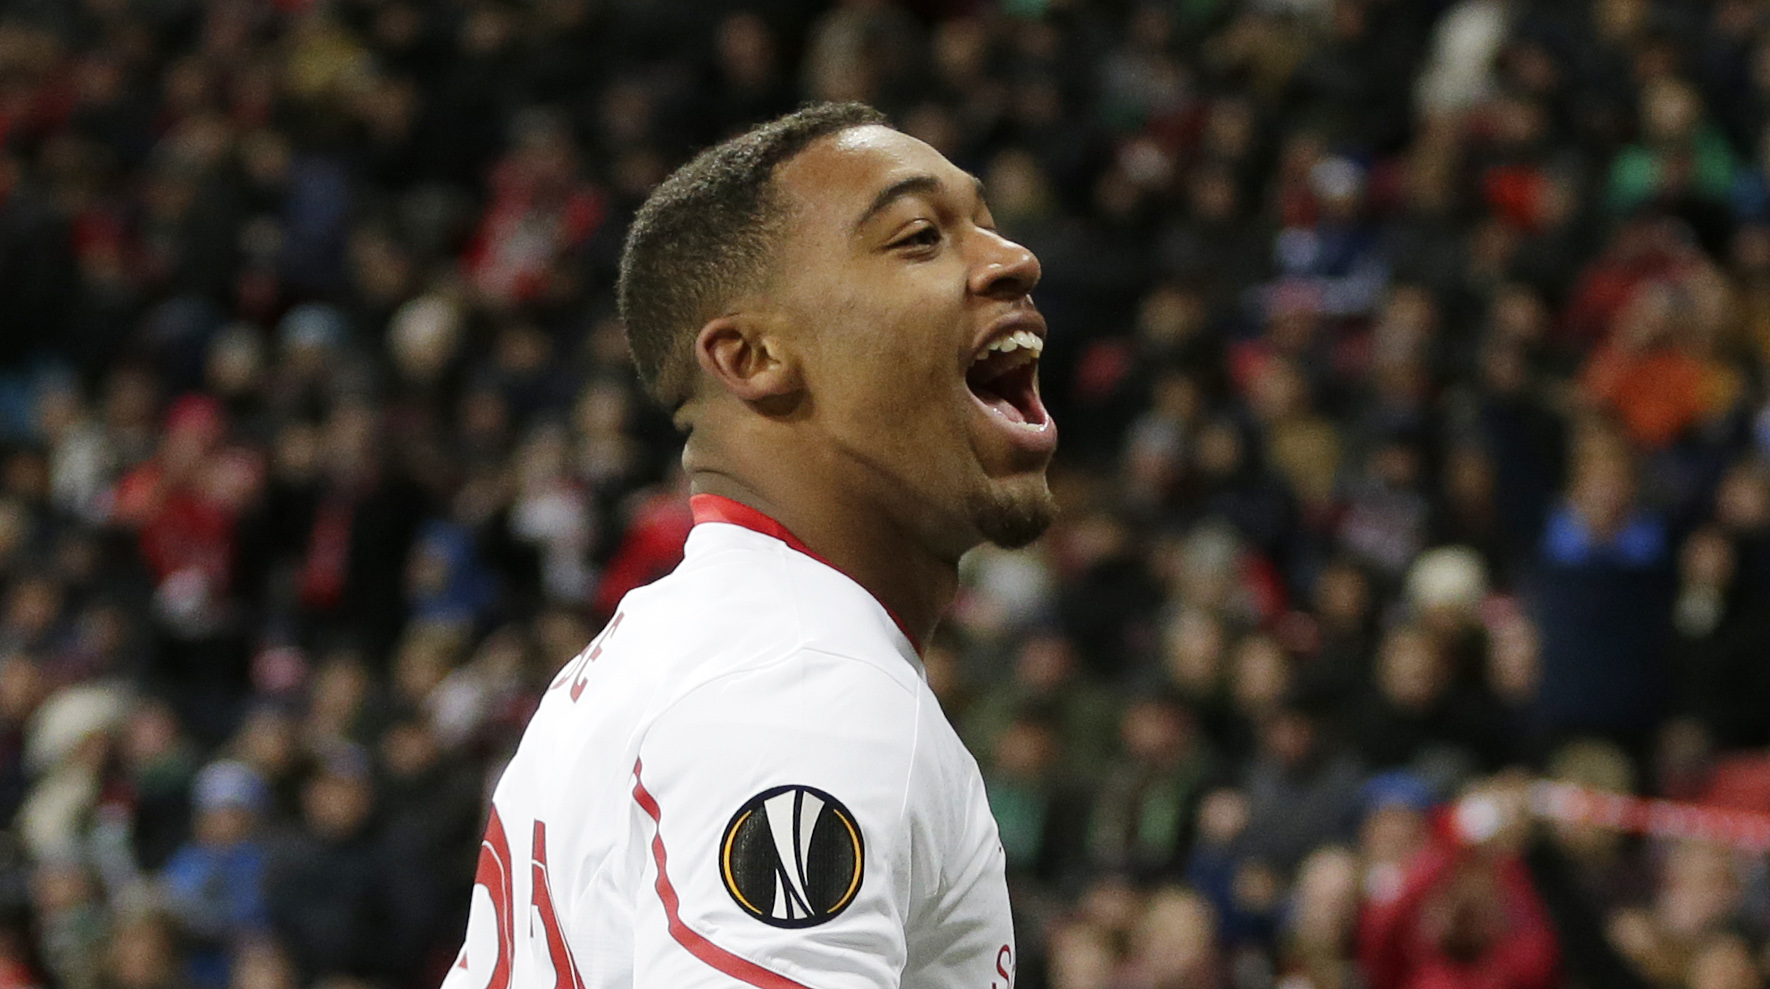 Jordon Ibe celebrates after scoring the first goal for Liverpool against Rubin Kazan during their group stage match of the UEFA Europa League in the Kazan Arena, of Kazan, Russia, on November 5, 2015. Photo: Action Images via Reuters 